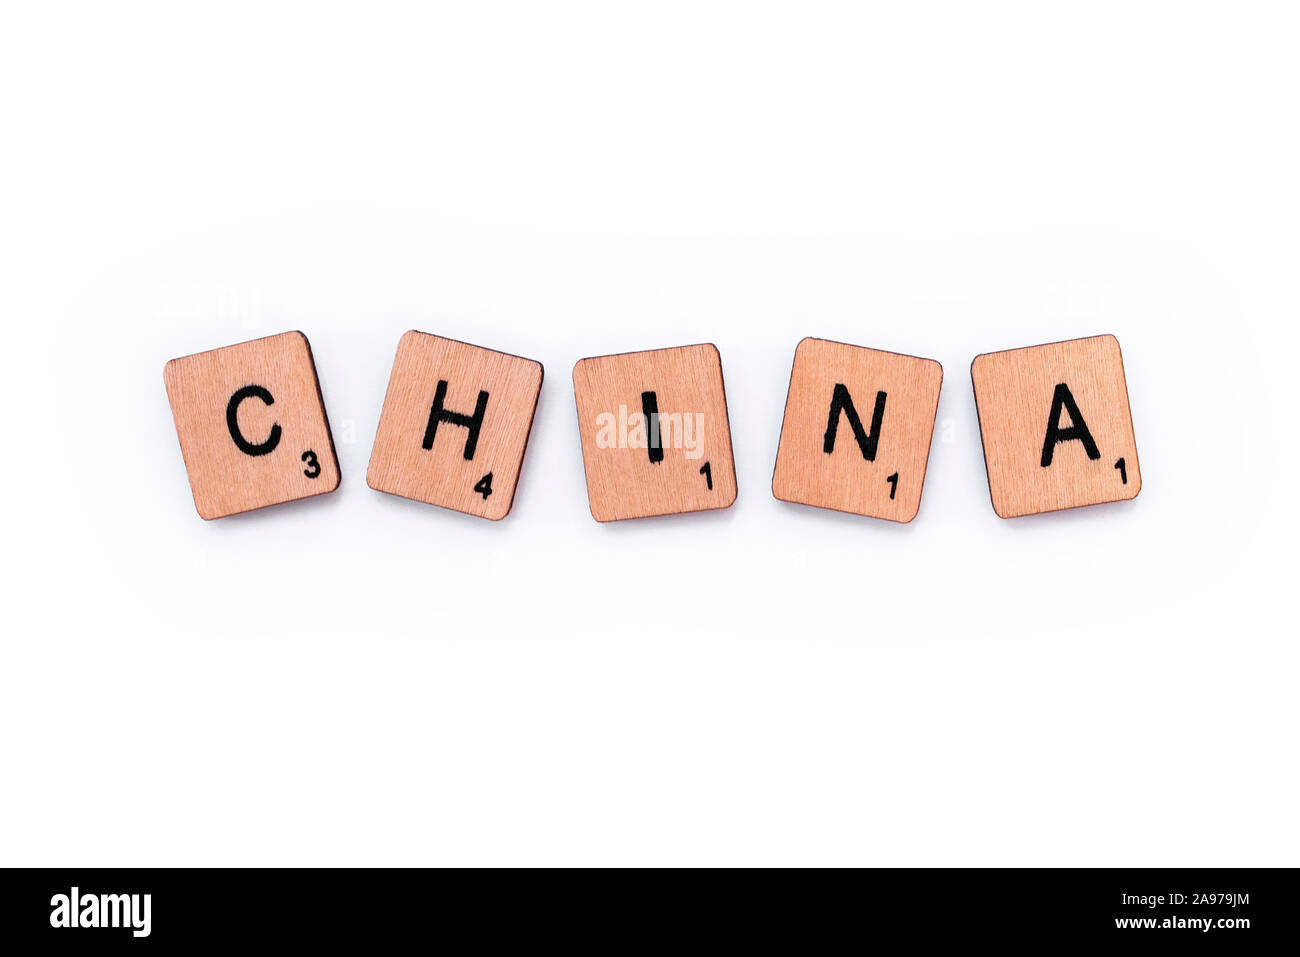 London, UK - June 16th 2019: The word CHINA, spelt with wooden letter tiles over a white background. Stock Photo